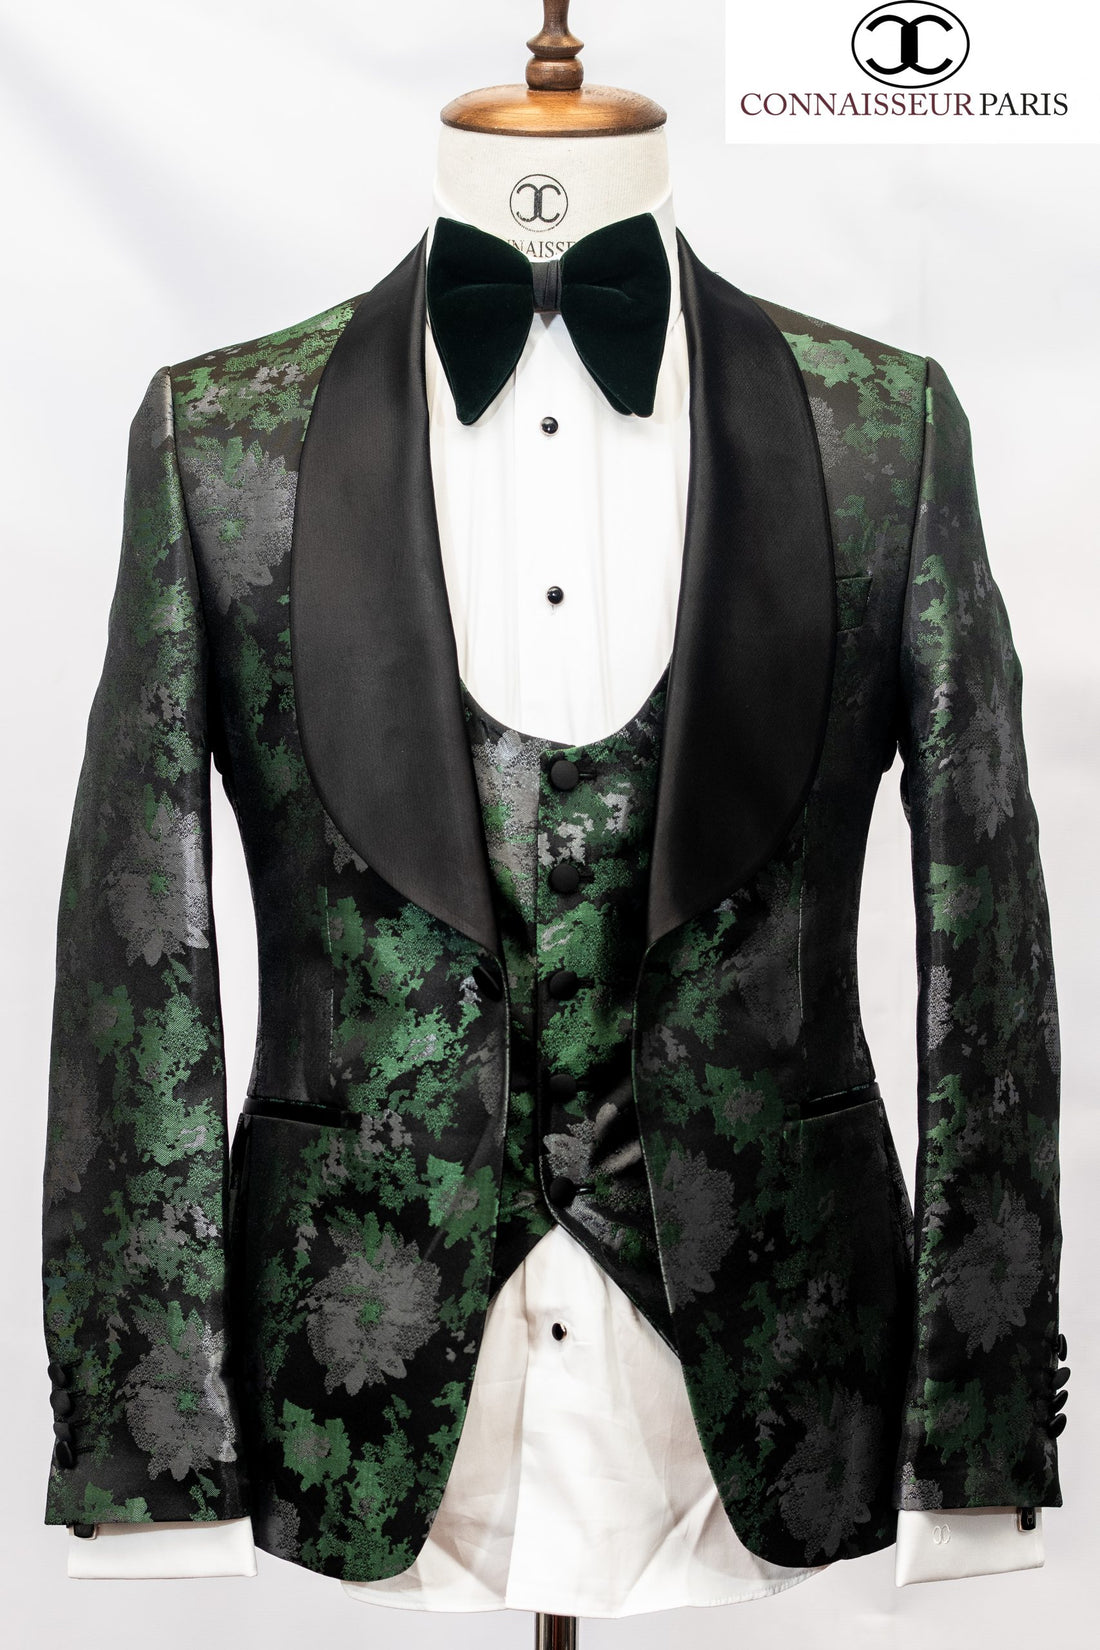 Connaisseur - Green with grey and black floral pattern 3-piece slim fit shawl lapel tux with U vest